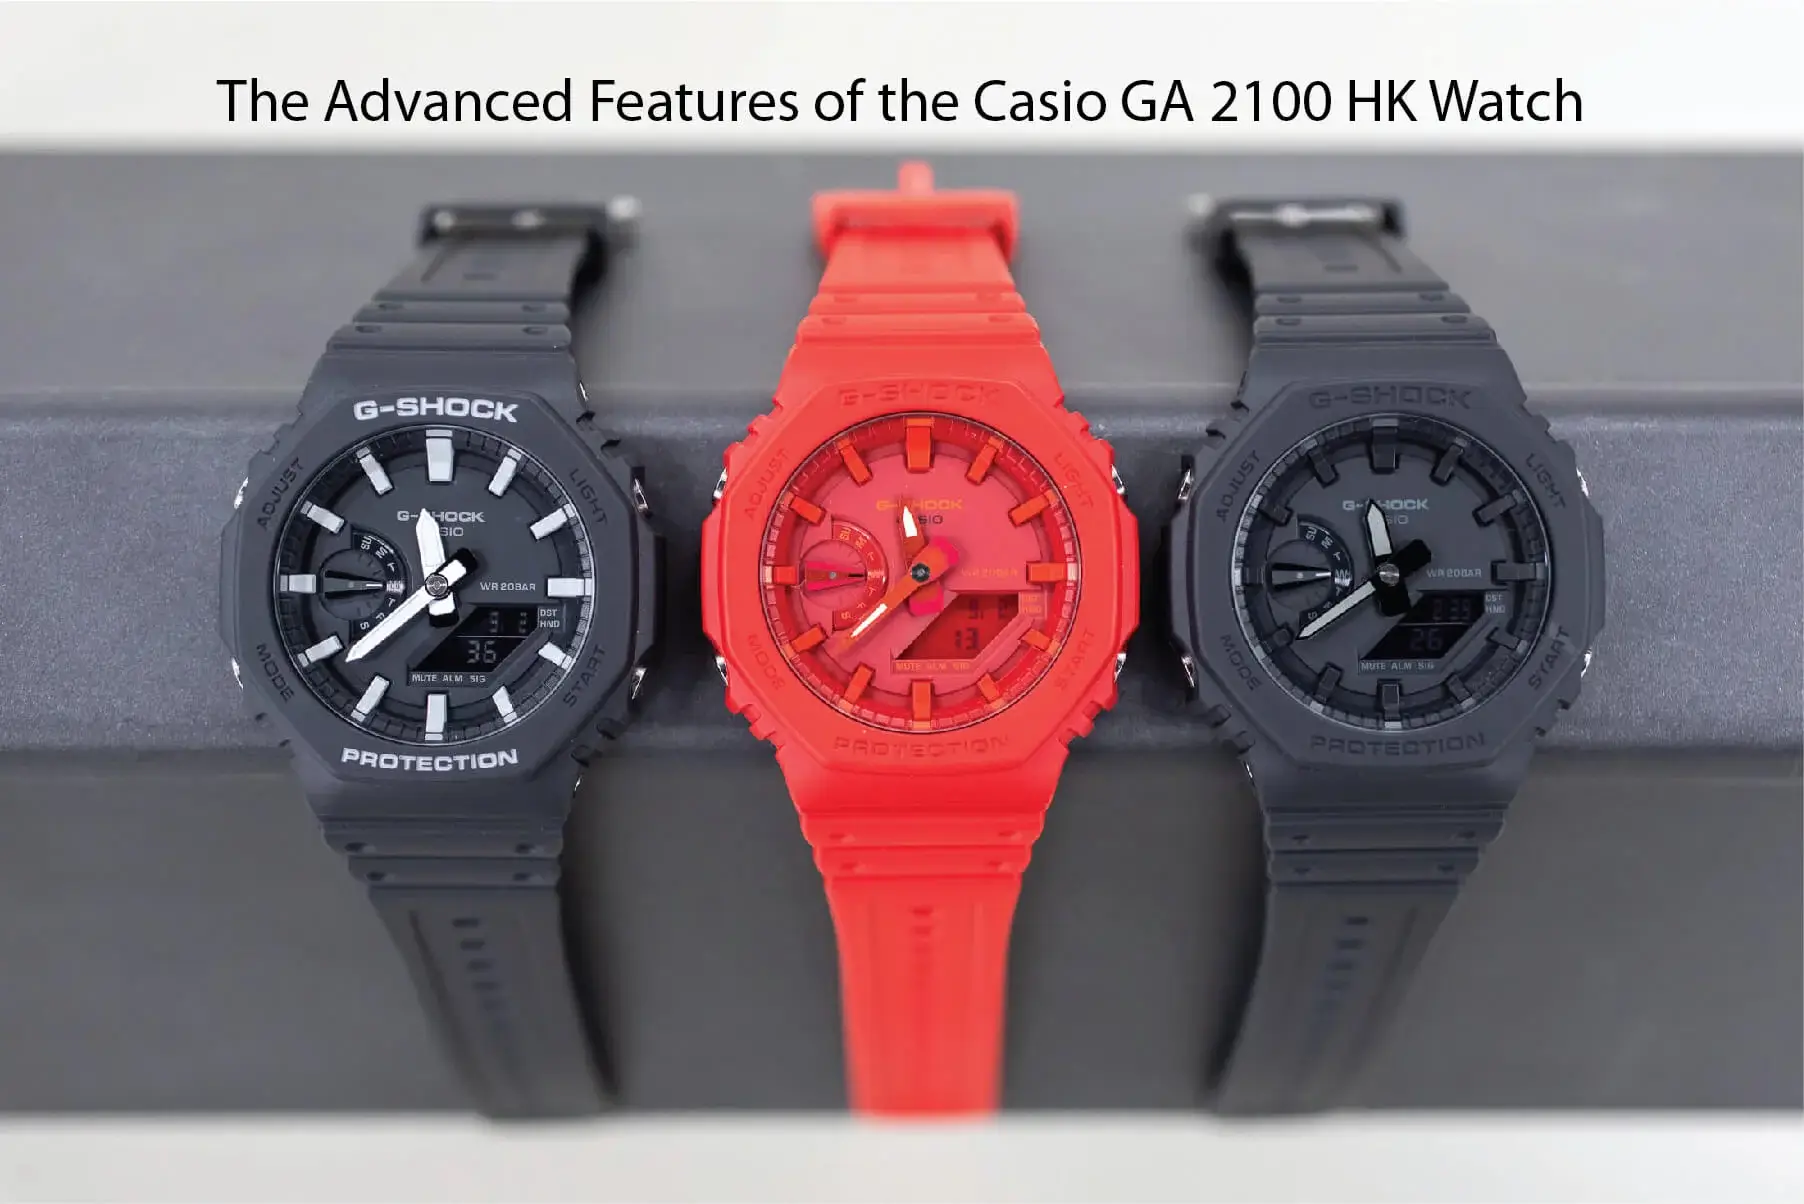 Features of the Casio GA 2100 HK Watch